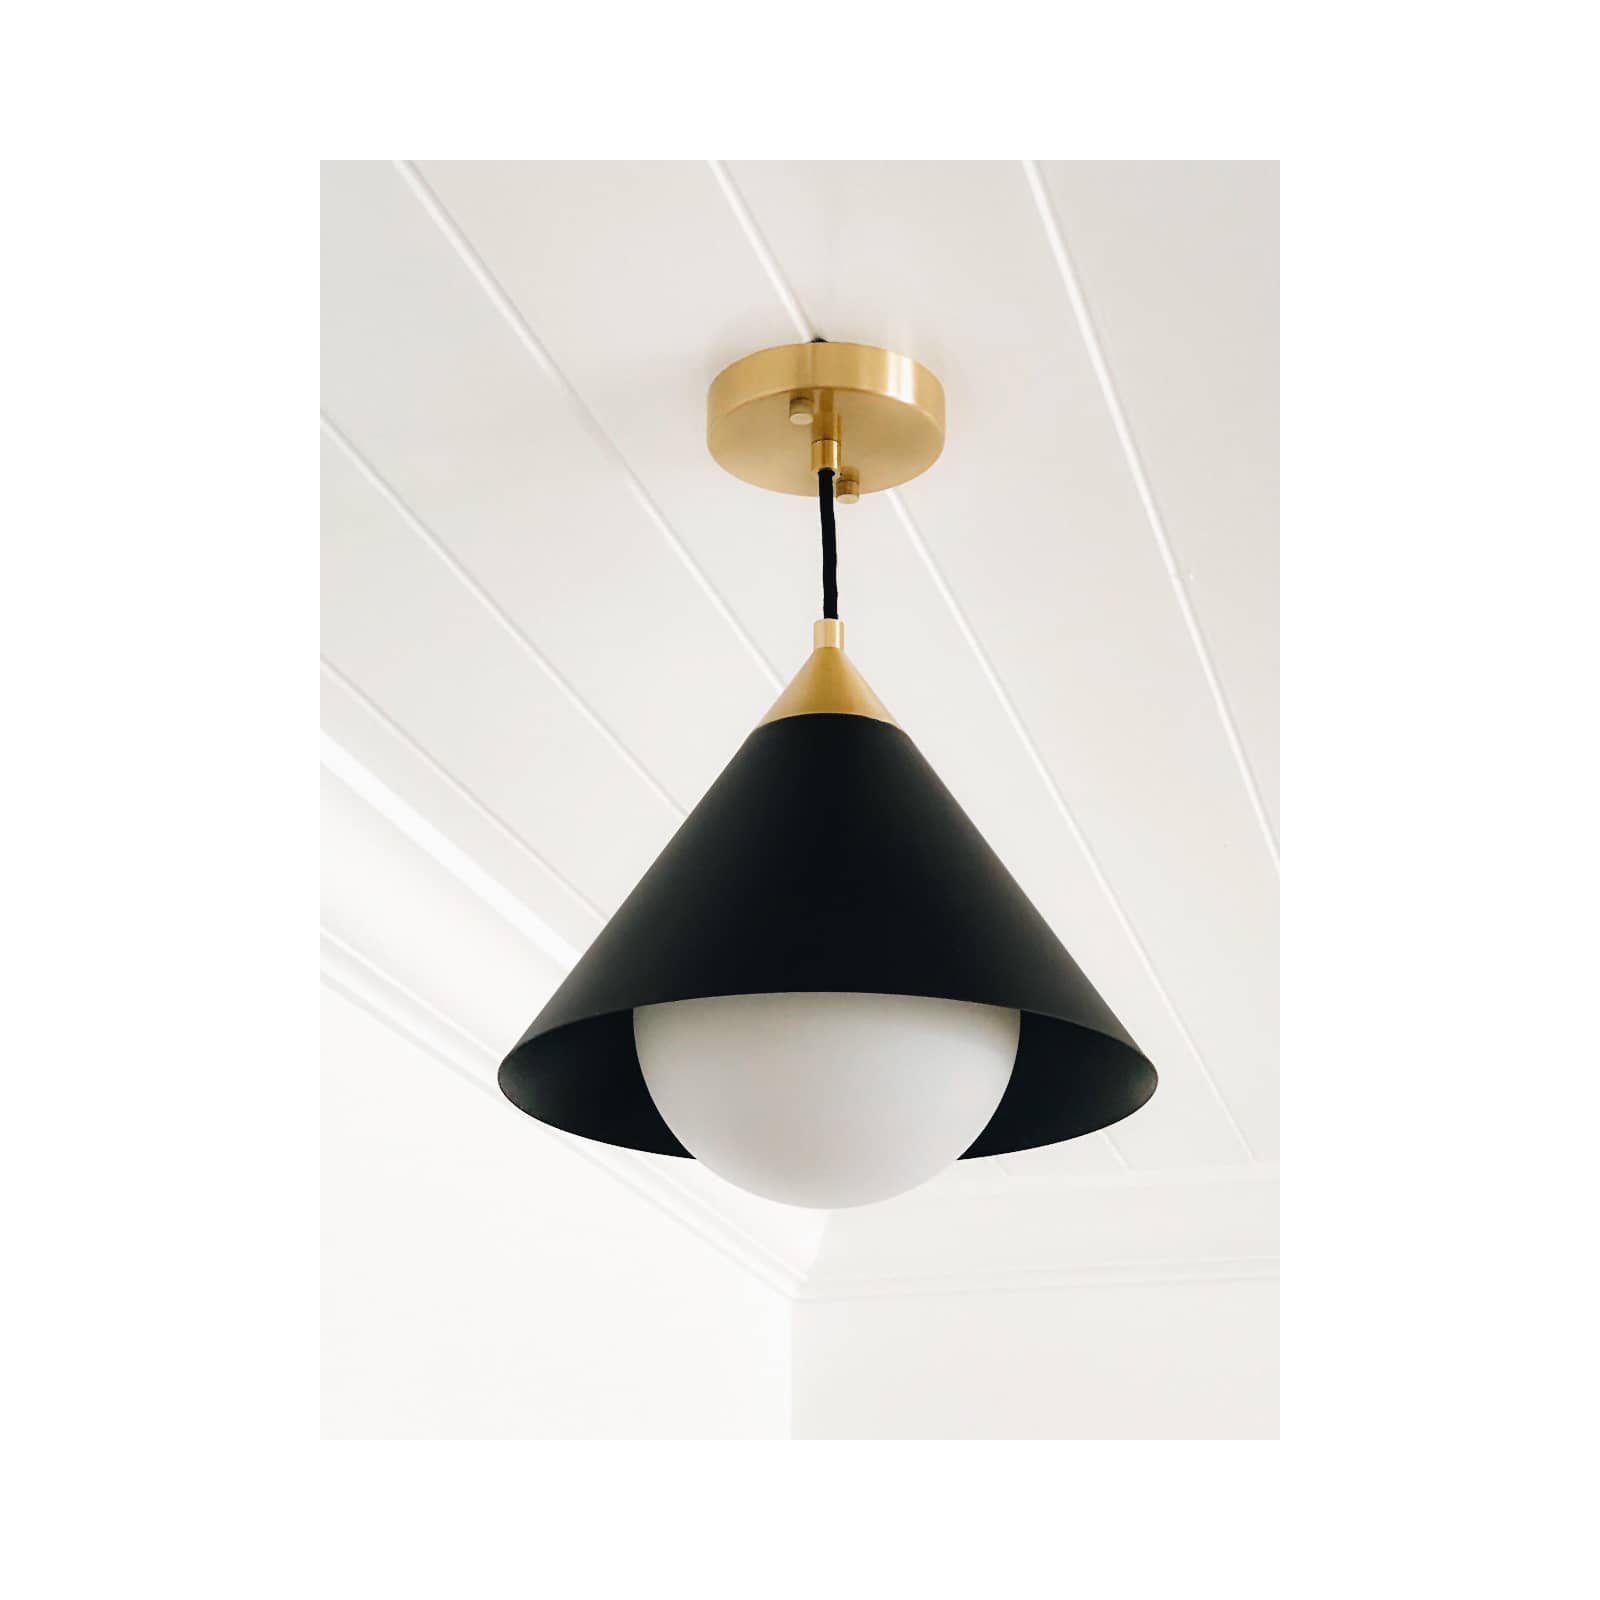 Regina Andrew Hilton Pendant in Blackened Brass and Natural Brass